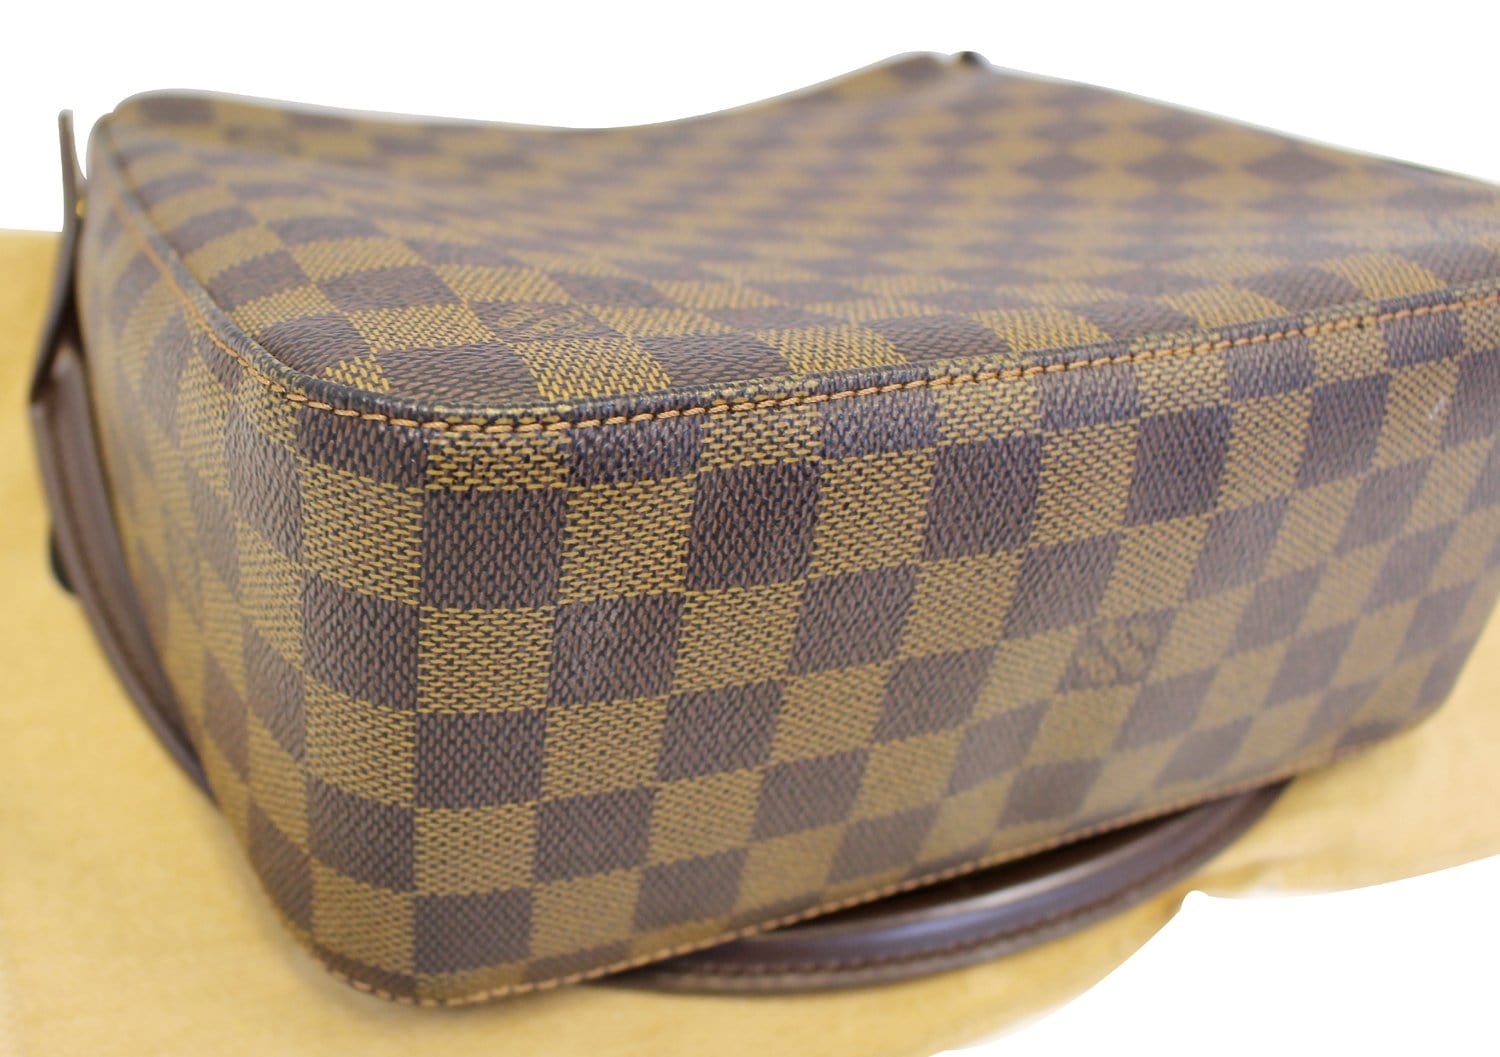 POWERED BY BUSINESS.Louis Vuitton Damier Looping MM